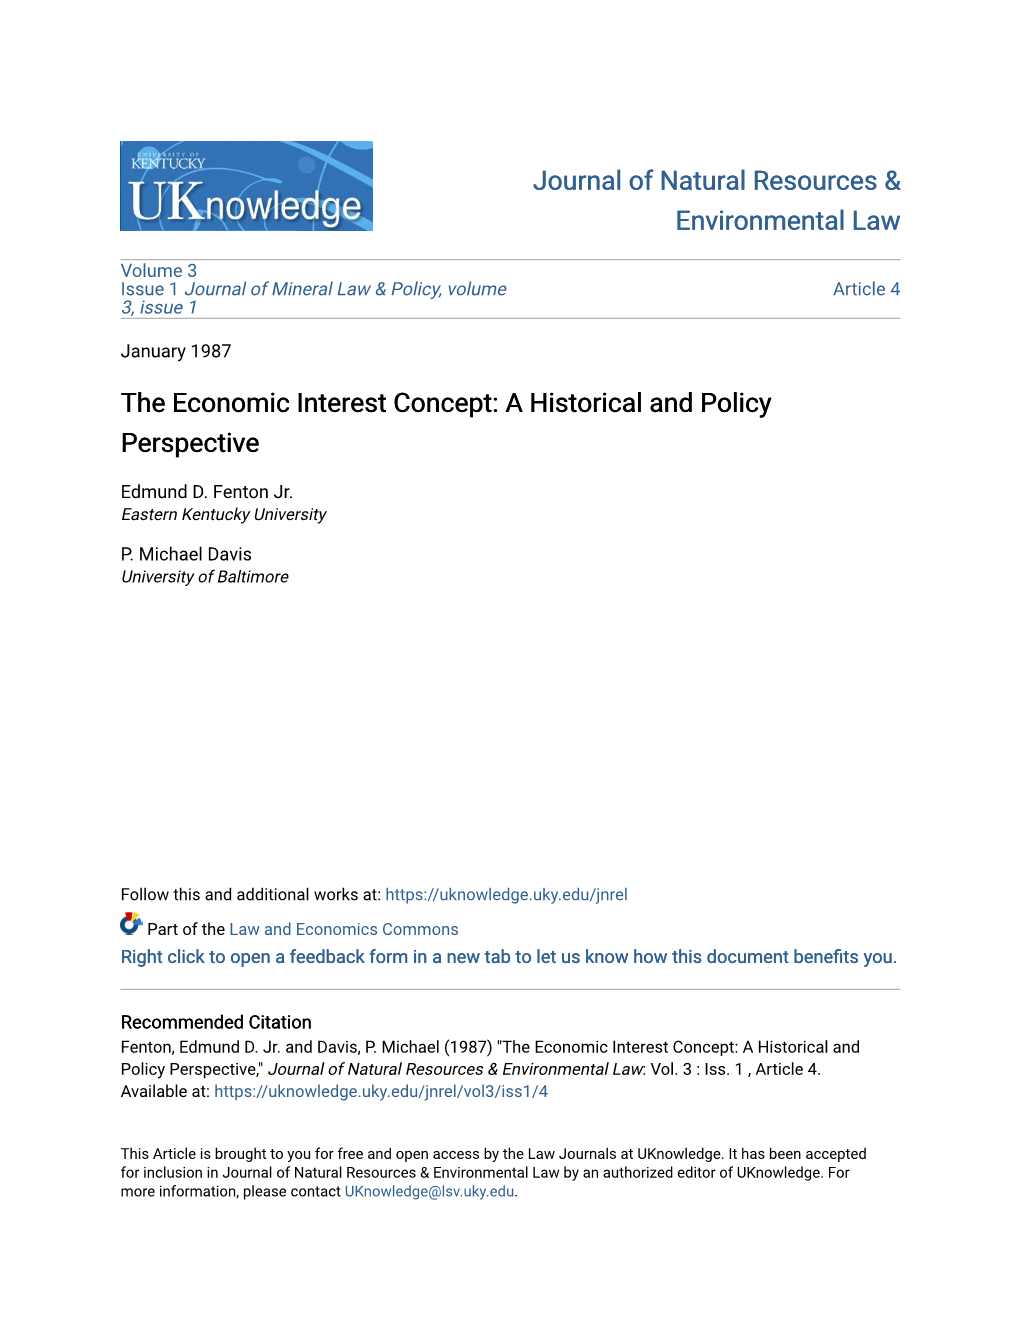 The Economic Interest Concept: a Historical and Policy Perspective